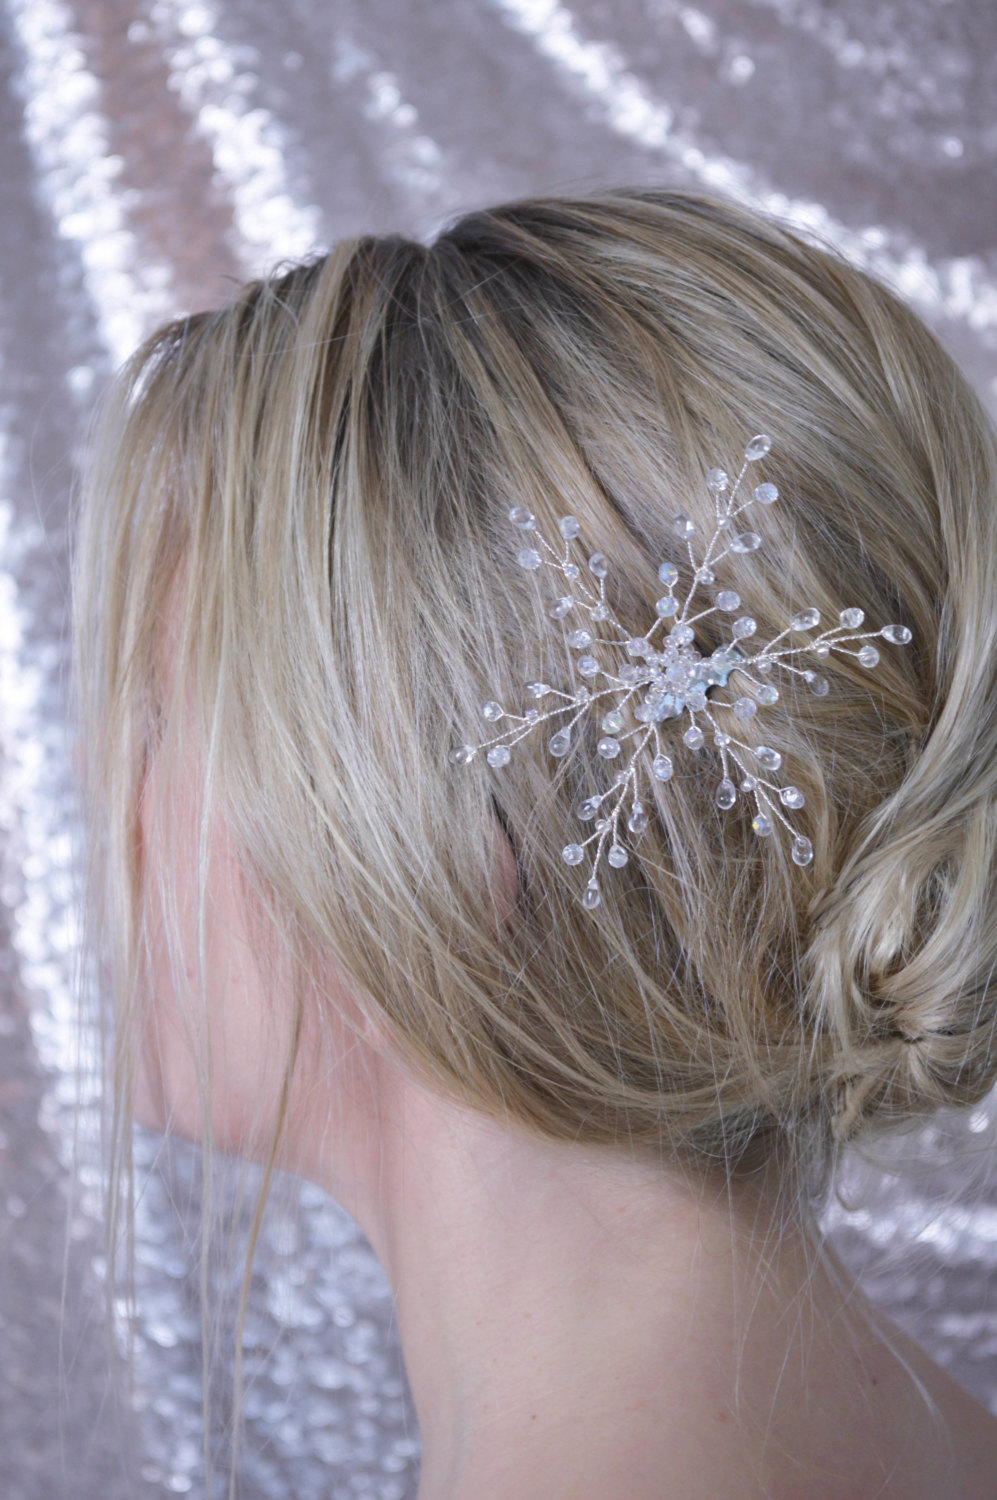 5 Christmas Hair Accessories That Don't Suck | StyleCaster